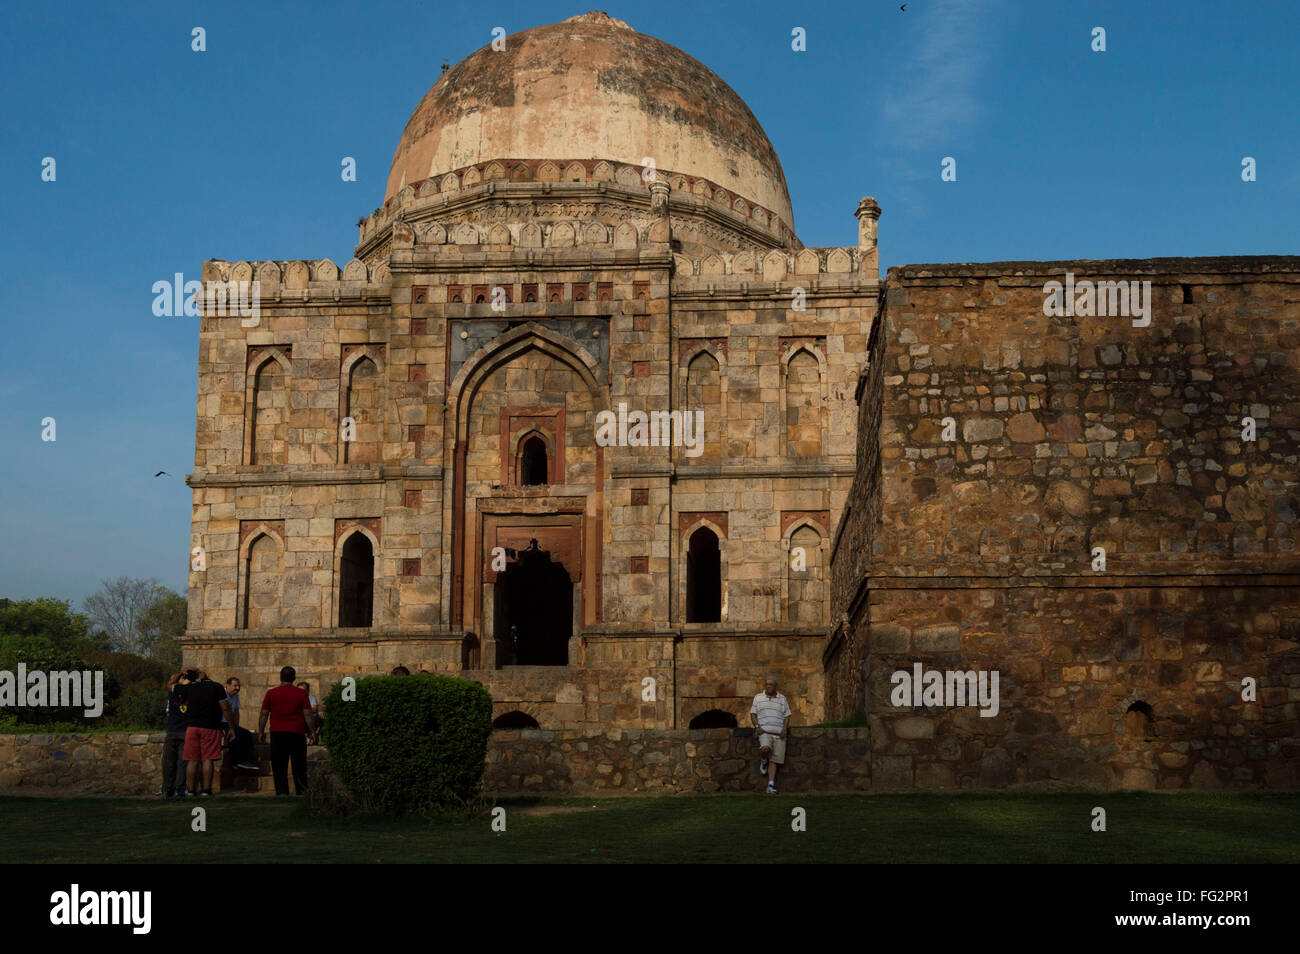 Bara Gumbad is an ancient monument constructed in 1490 in Delhi, during the Lodi dynasty, probably by Sikandar Lodi. Stock Photo